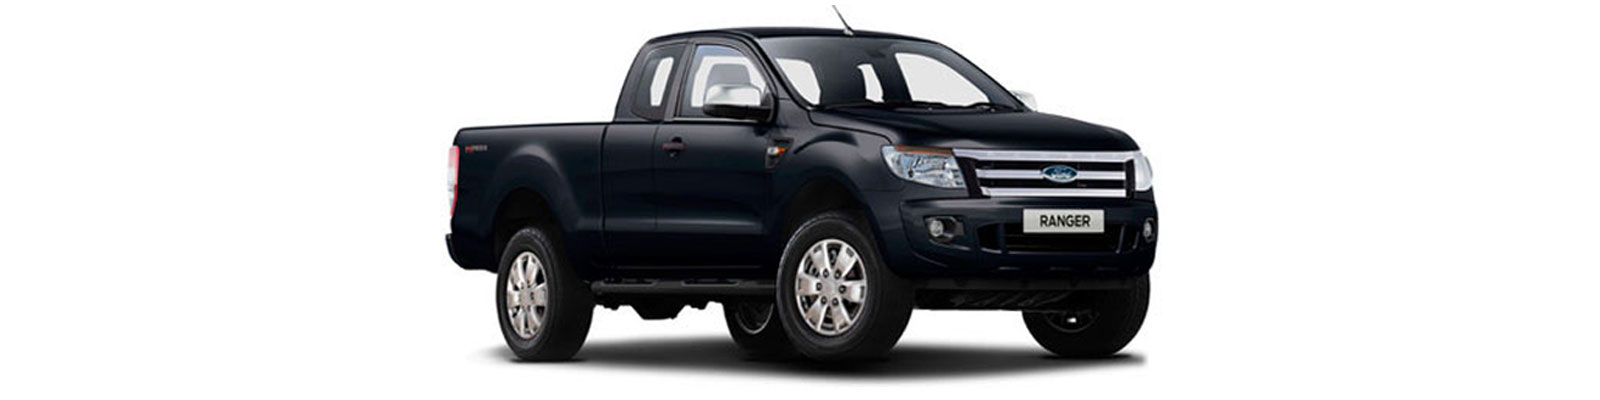 Accessories For The Ford Ranger Super Cab 2012 to 2016